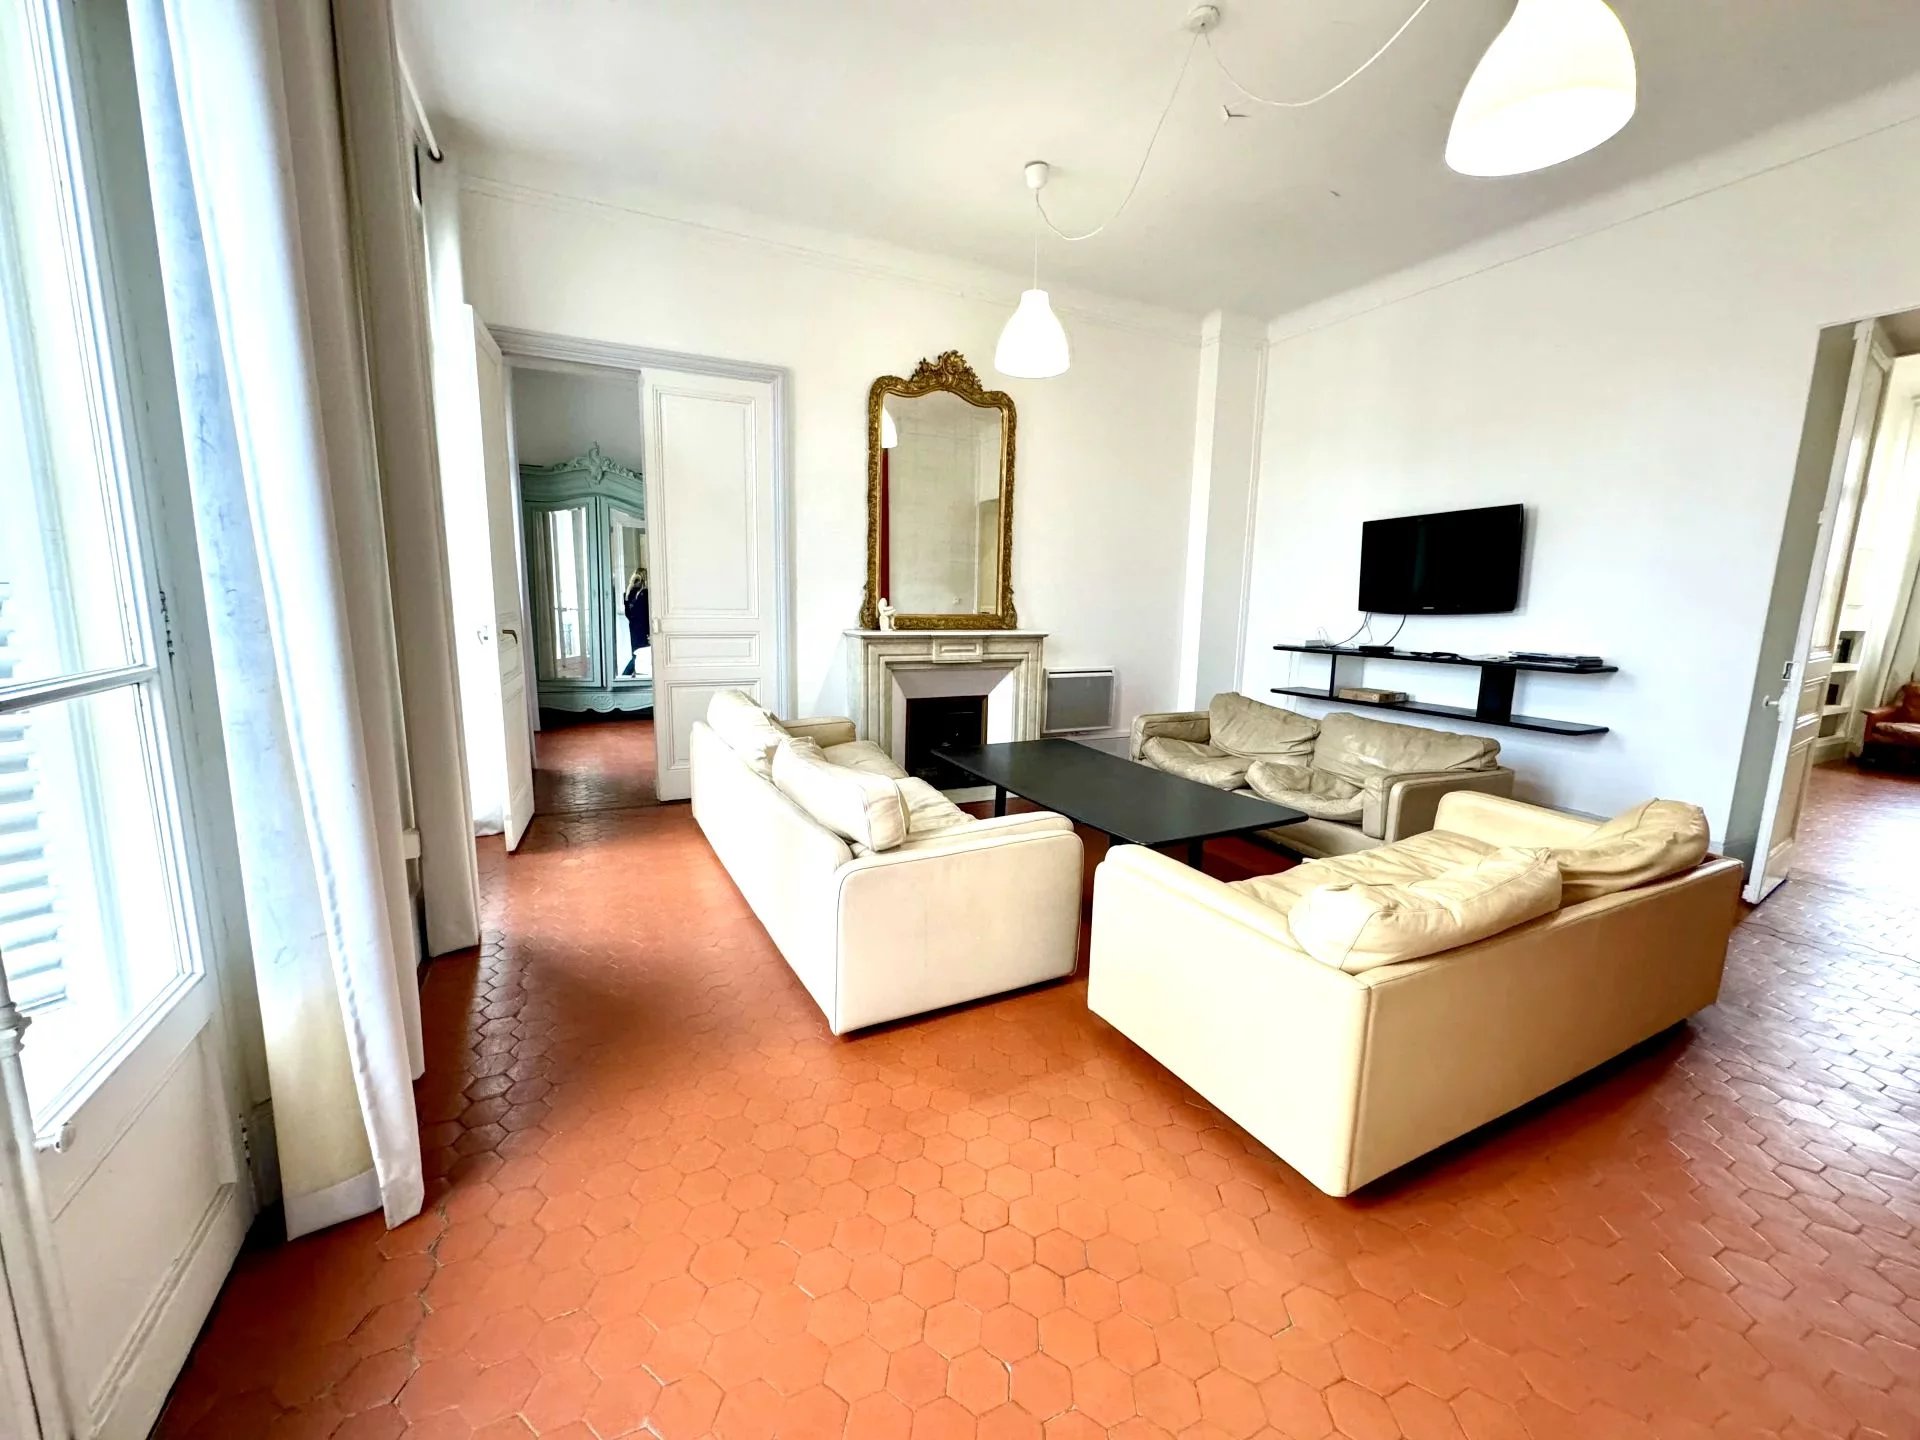 Cannes train station, near the palace, beautiful 6-room bourgeois apartment with cellars